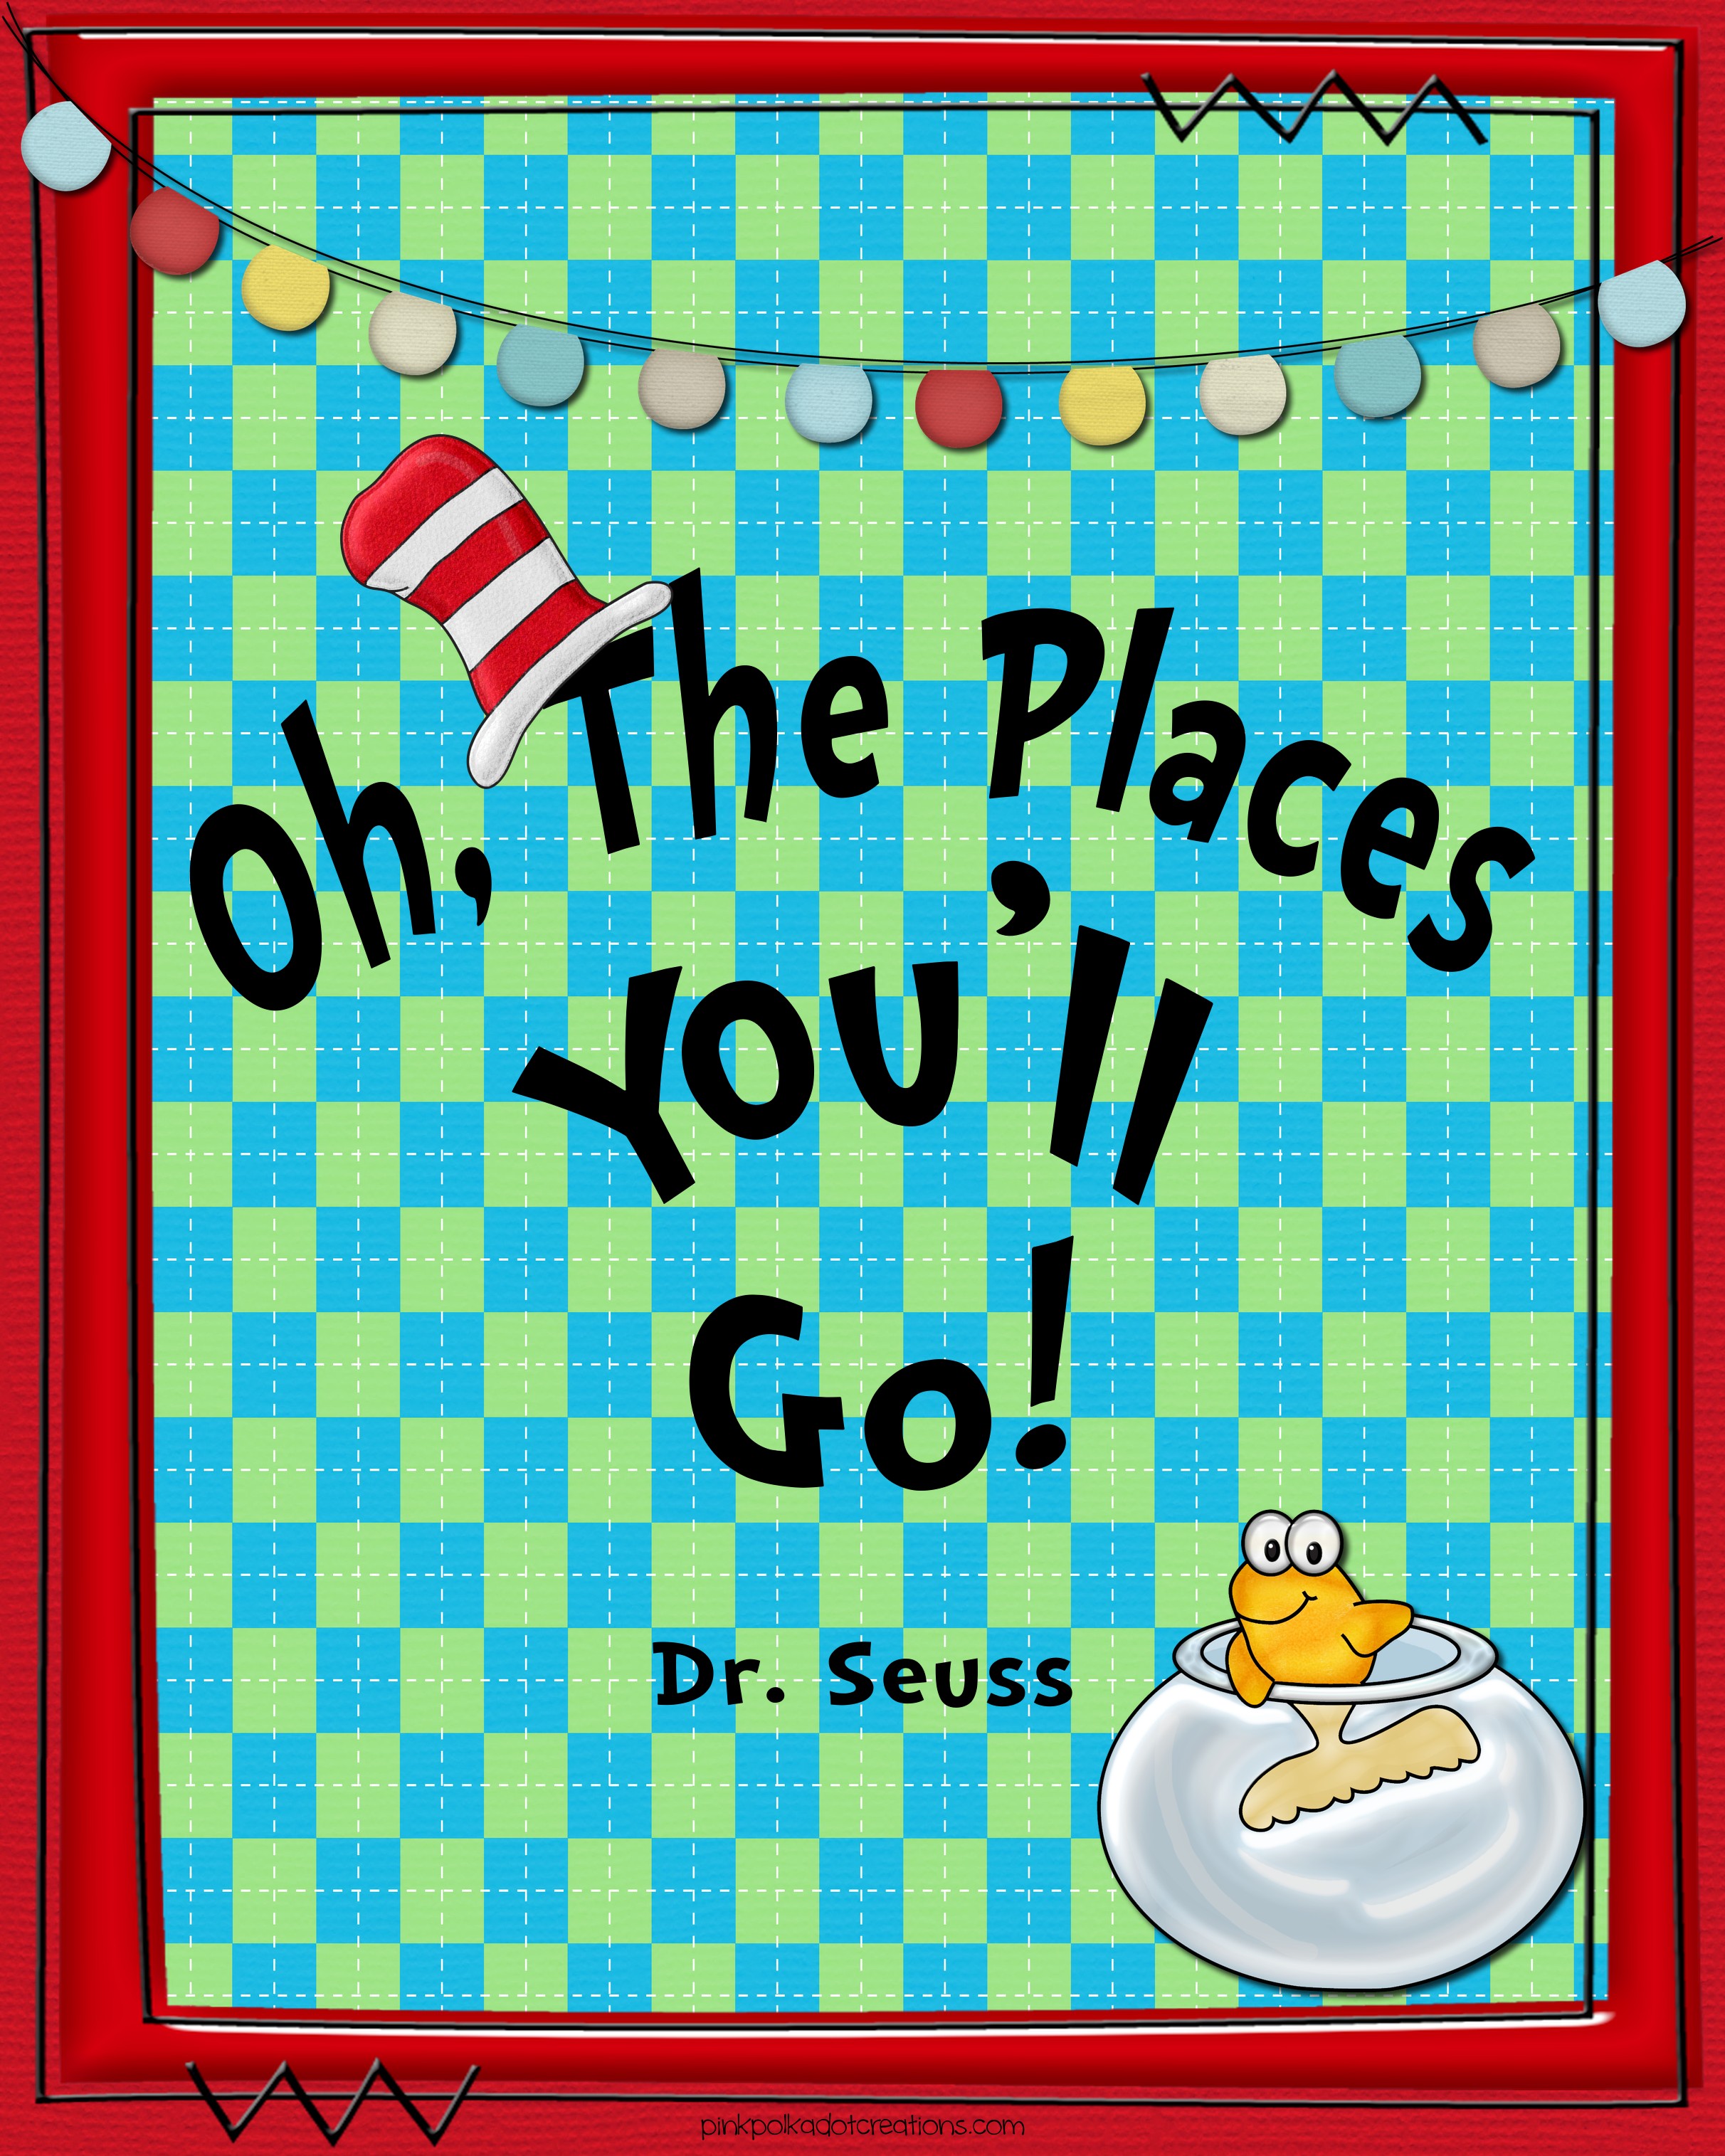 Oh, The Places You Can Go [1996]